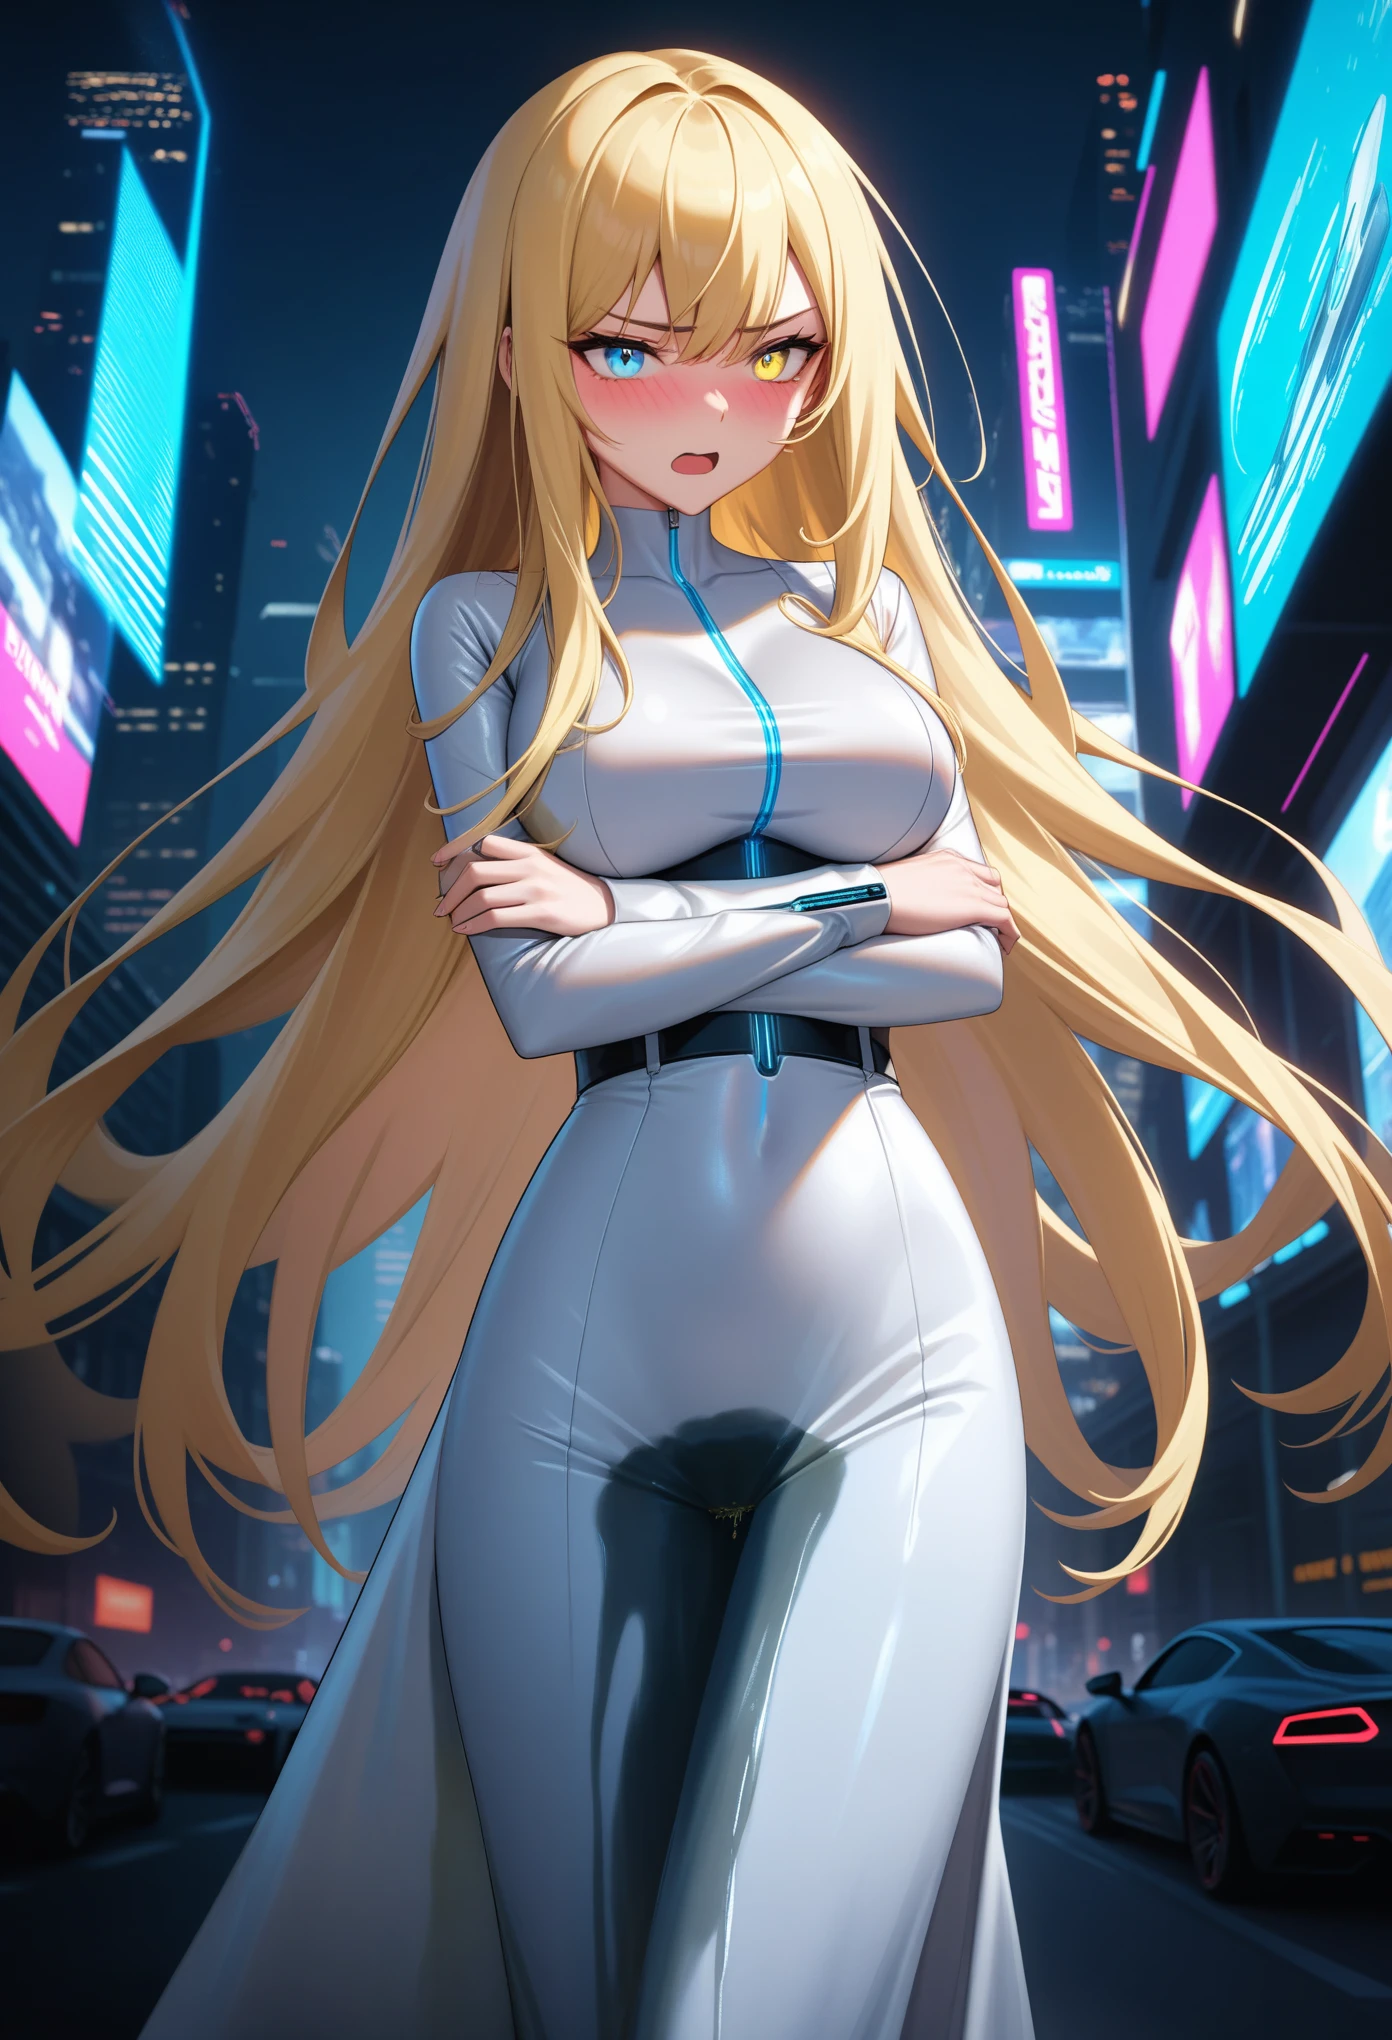 (high quality,Very detailed:1.37, High resolution), Woman, (very long hair:1.5), blonde hair, (multicolored eyes:1.5), blue eyes, yellow eyes, large breasts, (wetting herself:1.5), standing, (long tight dress:1.5), (arms crossed:1.5), (embarrassed:1.5), (humiliation:1.5), (angry:1.25), (blushing:1.5), open mouth, Cyberpunk Style, Cyberpunk Cityscape, Neon Light, High-tech accessories, Meticulous details, (extremely detailed eys:1.37), Glowing LED pattern, Urban scenery, Futuristic elements, Mysterious Aura, ,Flying cars racing through the air, Holographic Advertising, Visually stunning architecture, Energetic and dynamic poses, Gives off a powerful aura, The cityscape reflected in her metallic eyes, Graceful movement amidst chaos, A moonlit sky with a futuristic hue, Pulsating Electronic Soundtrack, Enhanced Augmented Reality Overlays, Interacting with virtual objects in the environment